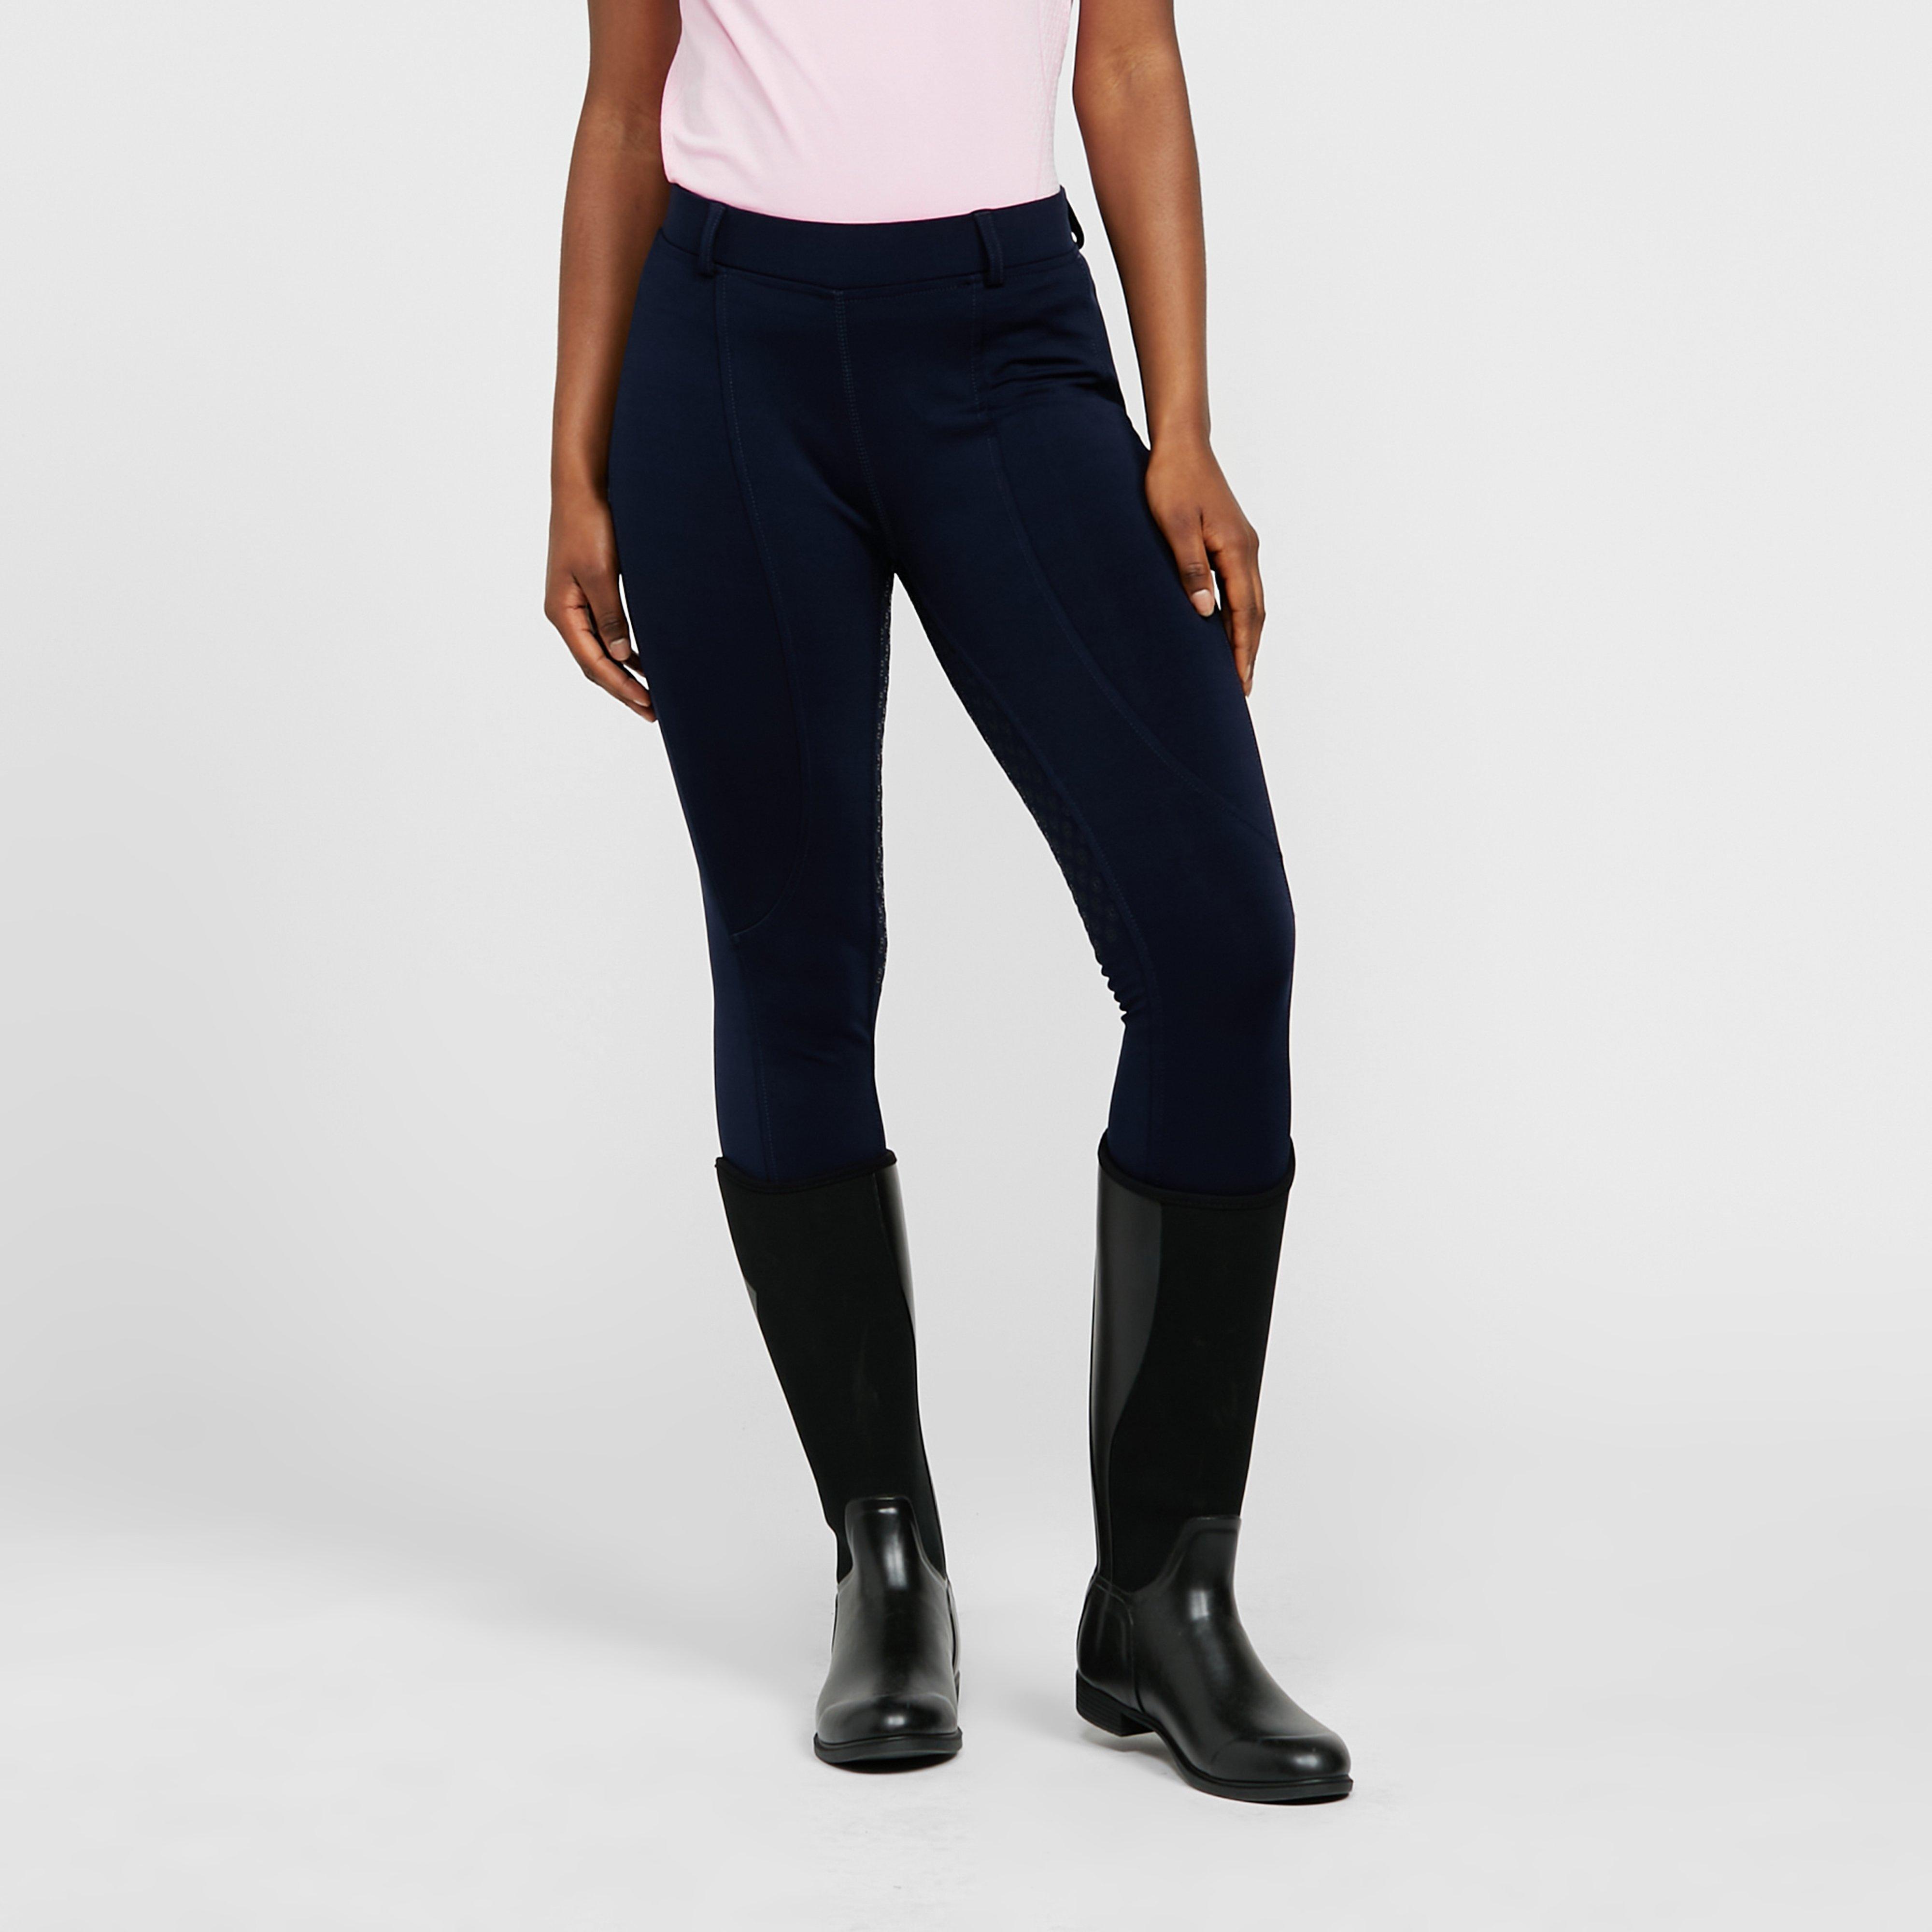 Image of Dublin Women's Cool-It Gel Riding Tights - Navy, NAVY